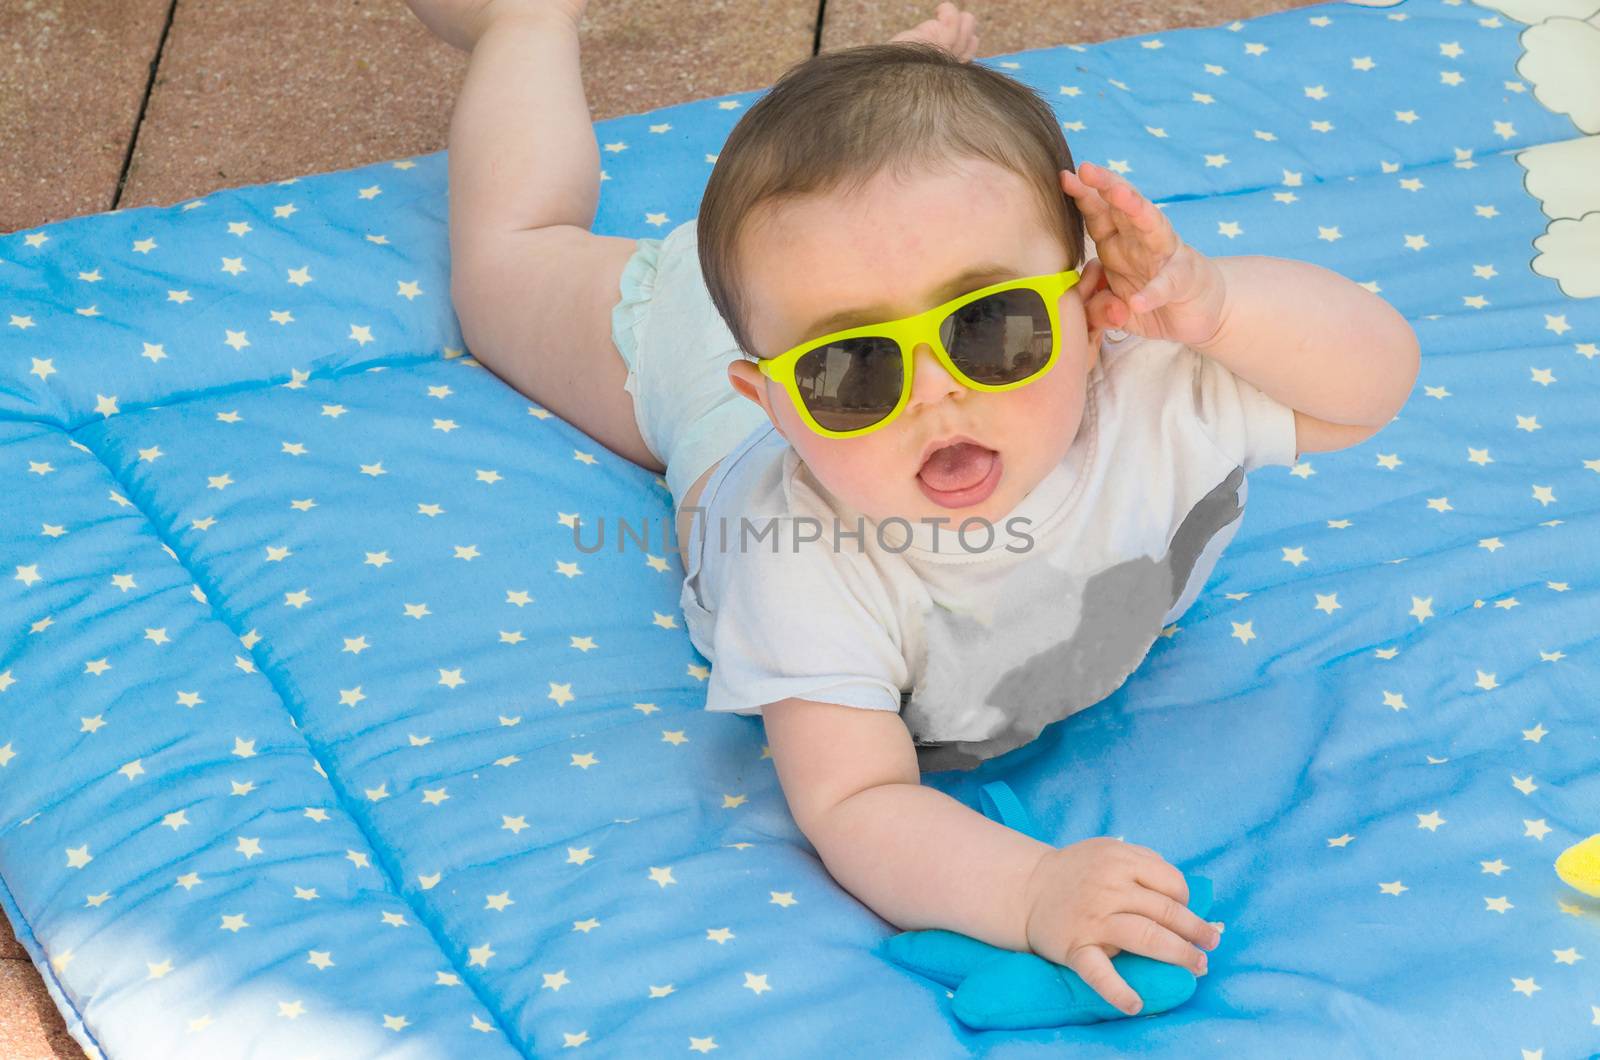 Baby posing on a blue blanket and wearing sun glasses.